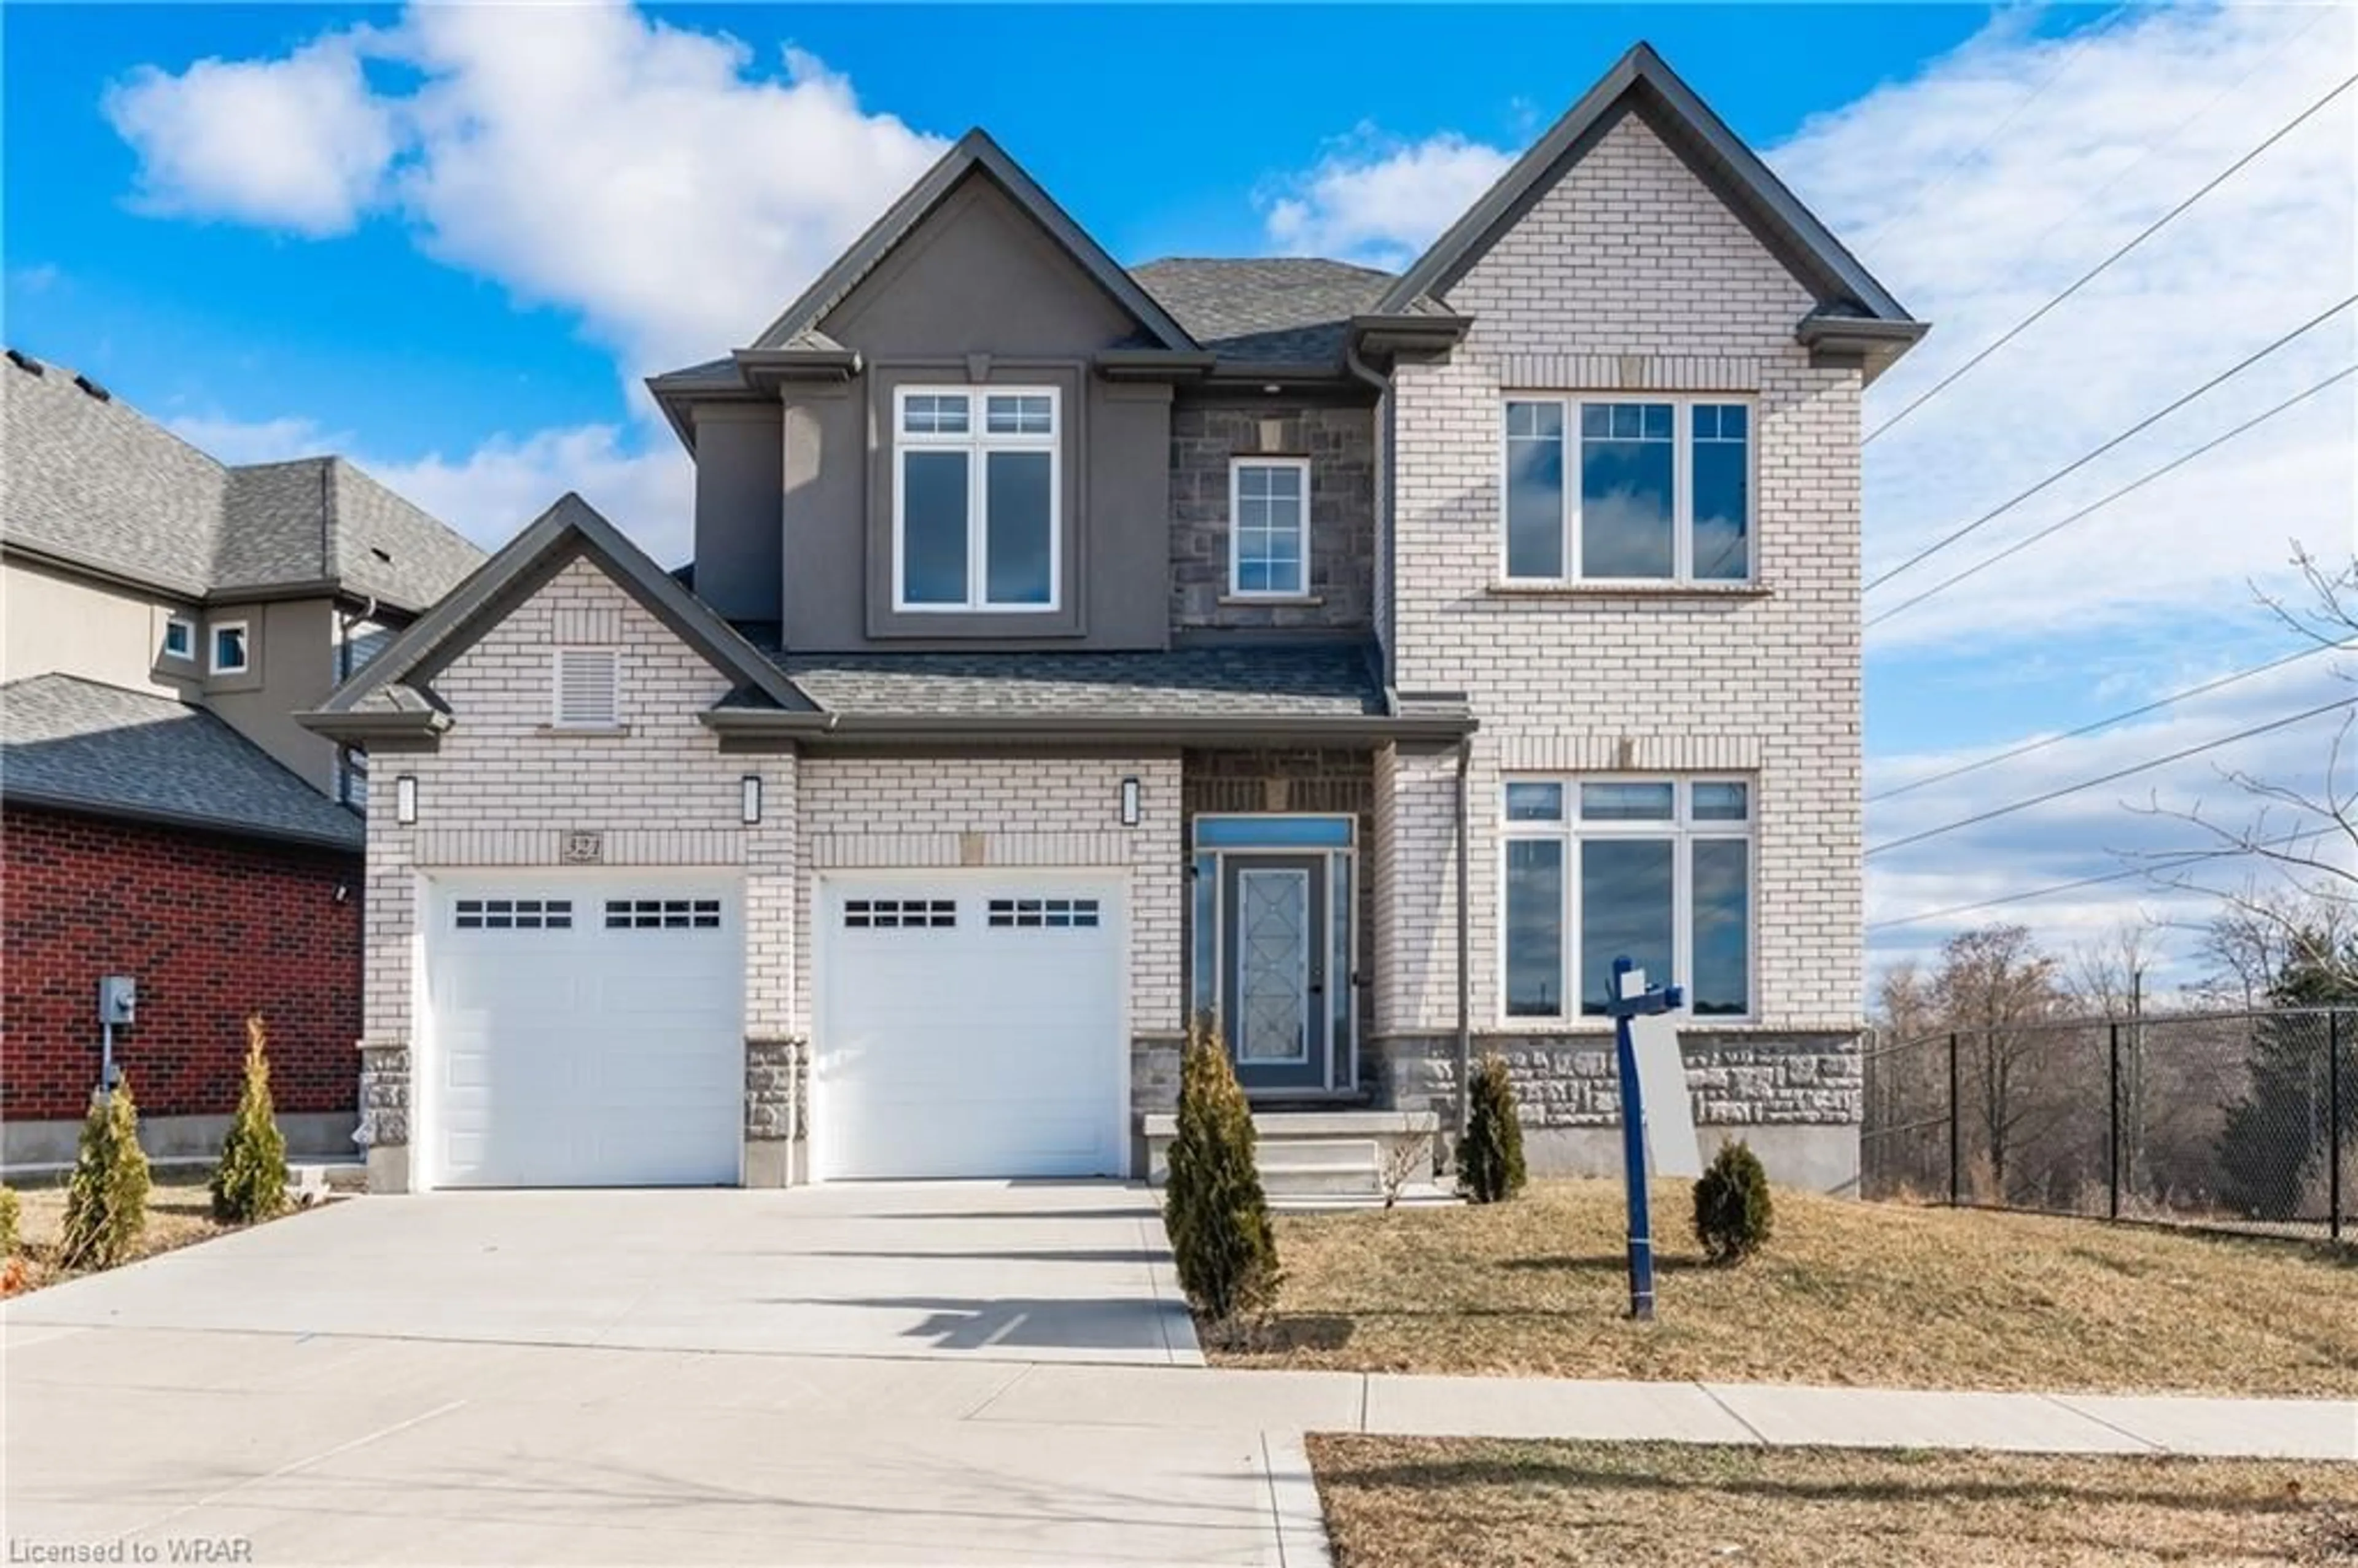 Home with brick exterior material for 321 Blair Creek Drive, Kitchener Ontario N2P 0G4